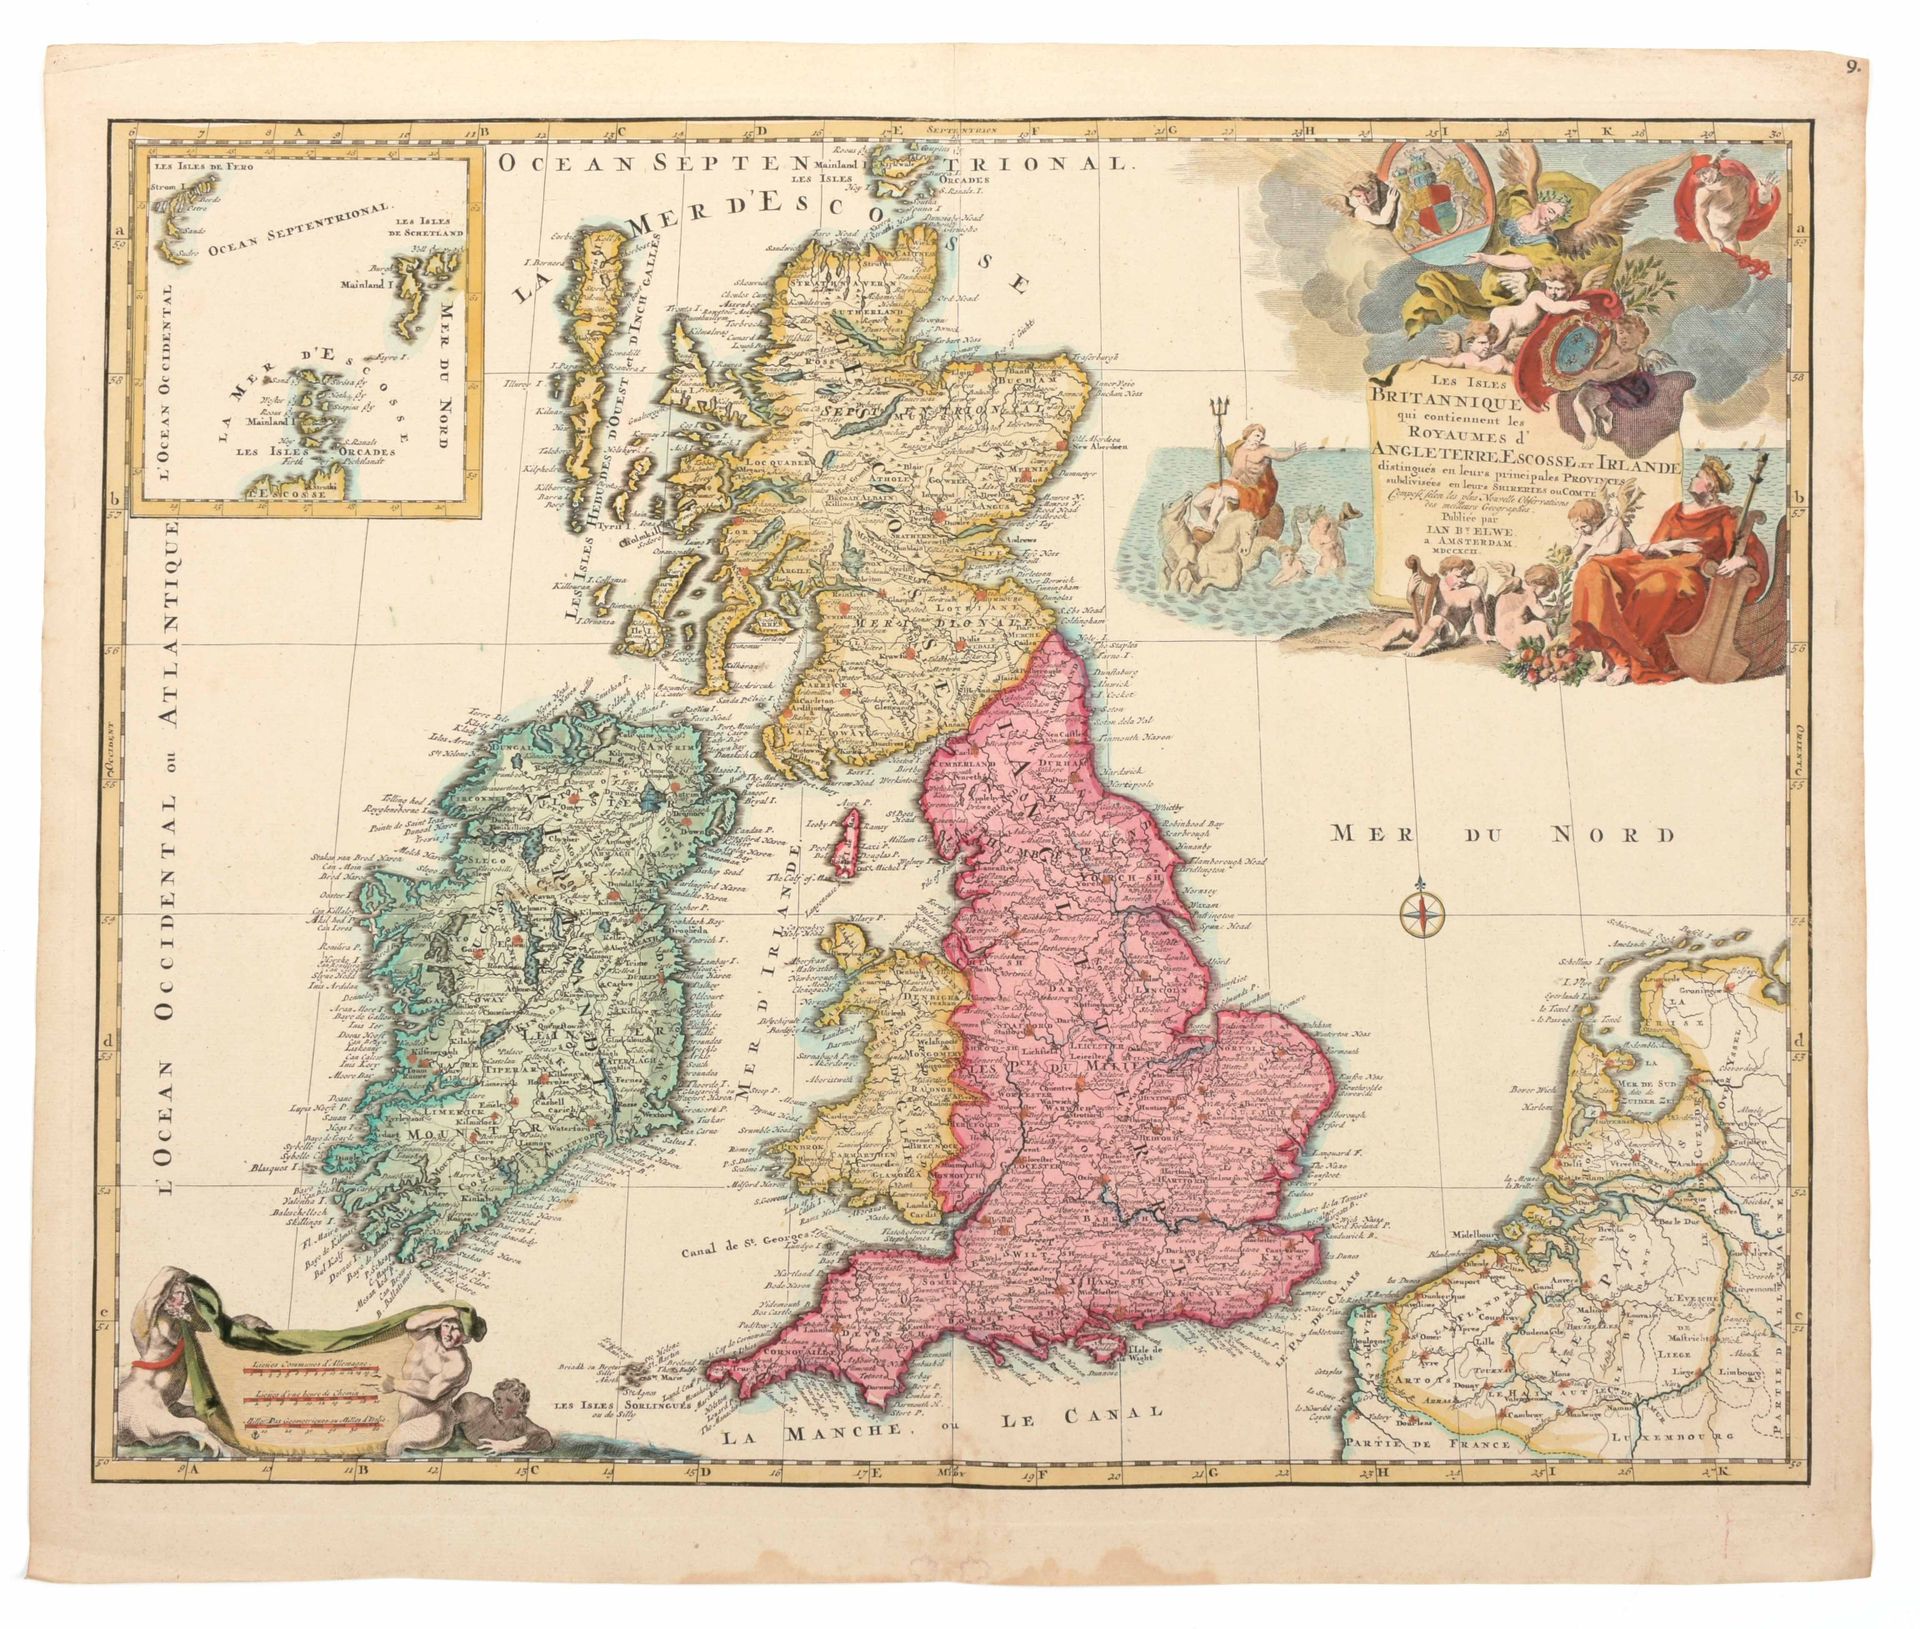 [GREAT BRITAIN] The British Isles containing the Kingdoms of England, Scotland a&hellip;